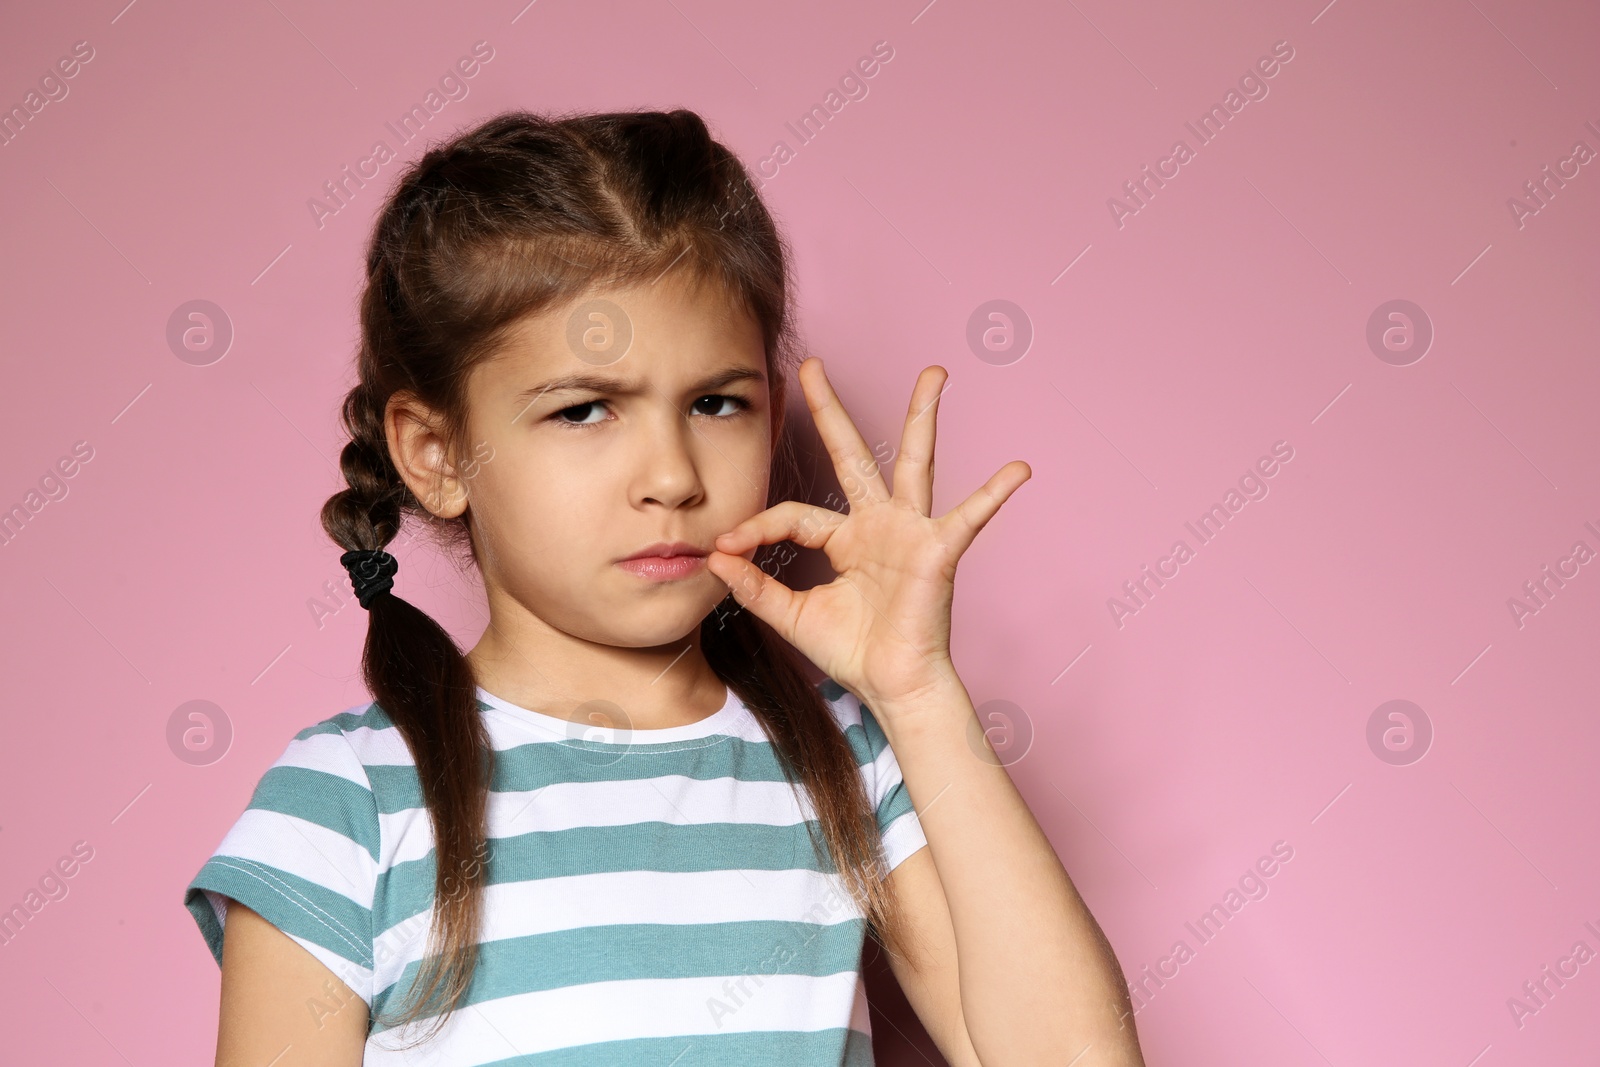 Photo of Little girl zipping her mouth on color background, space for text. Using sign language